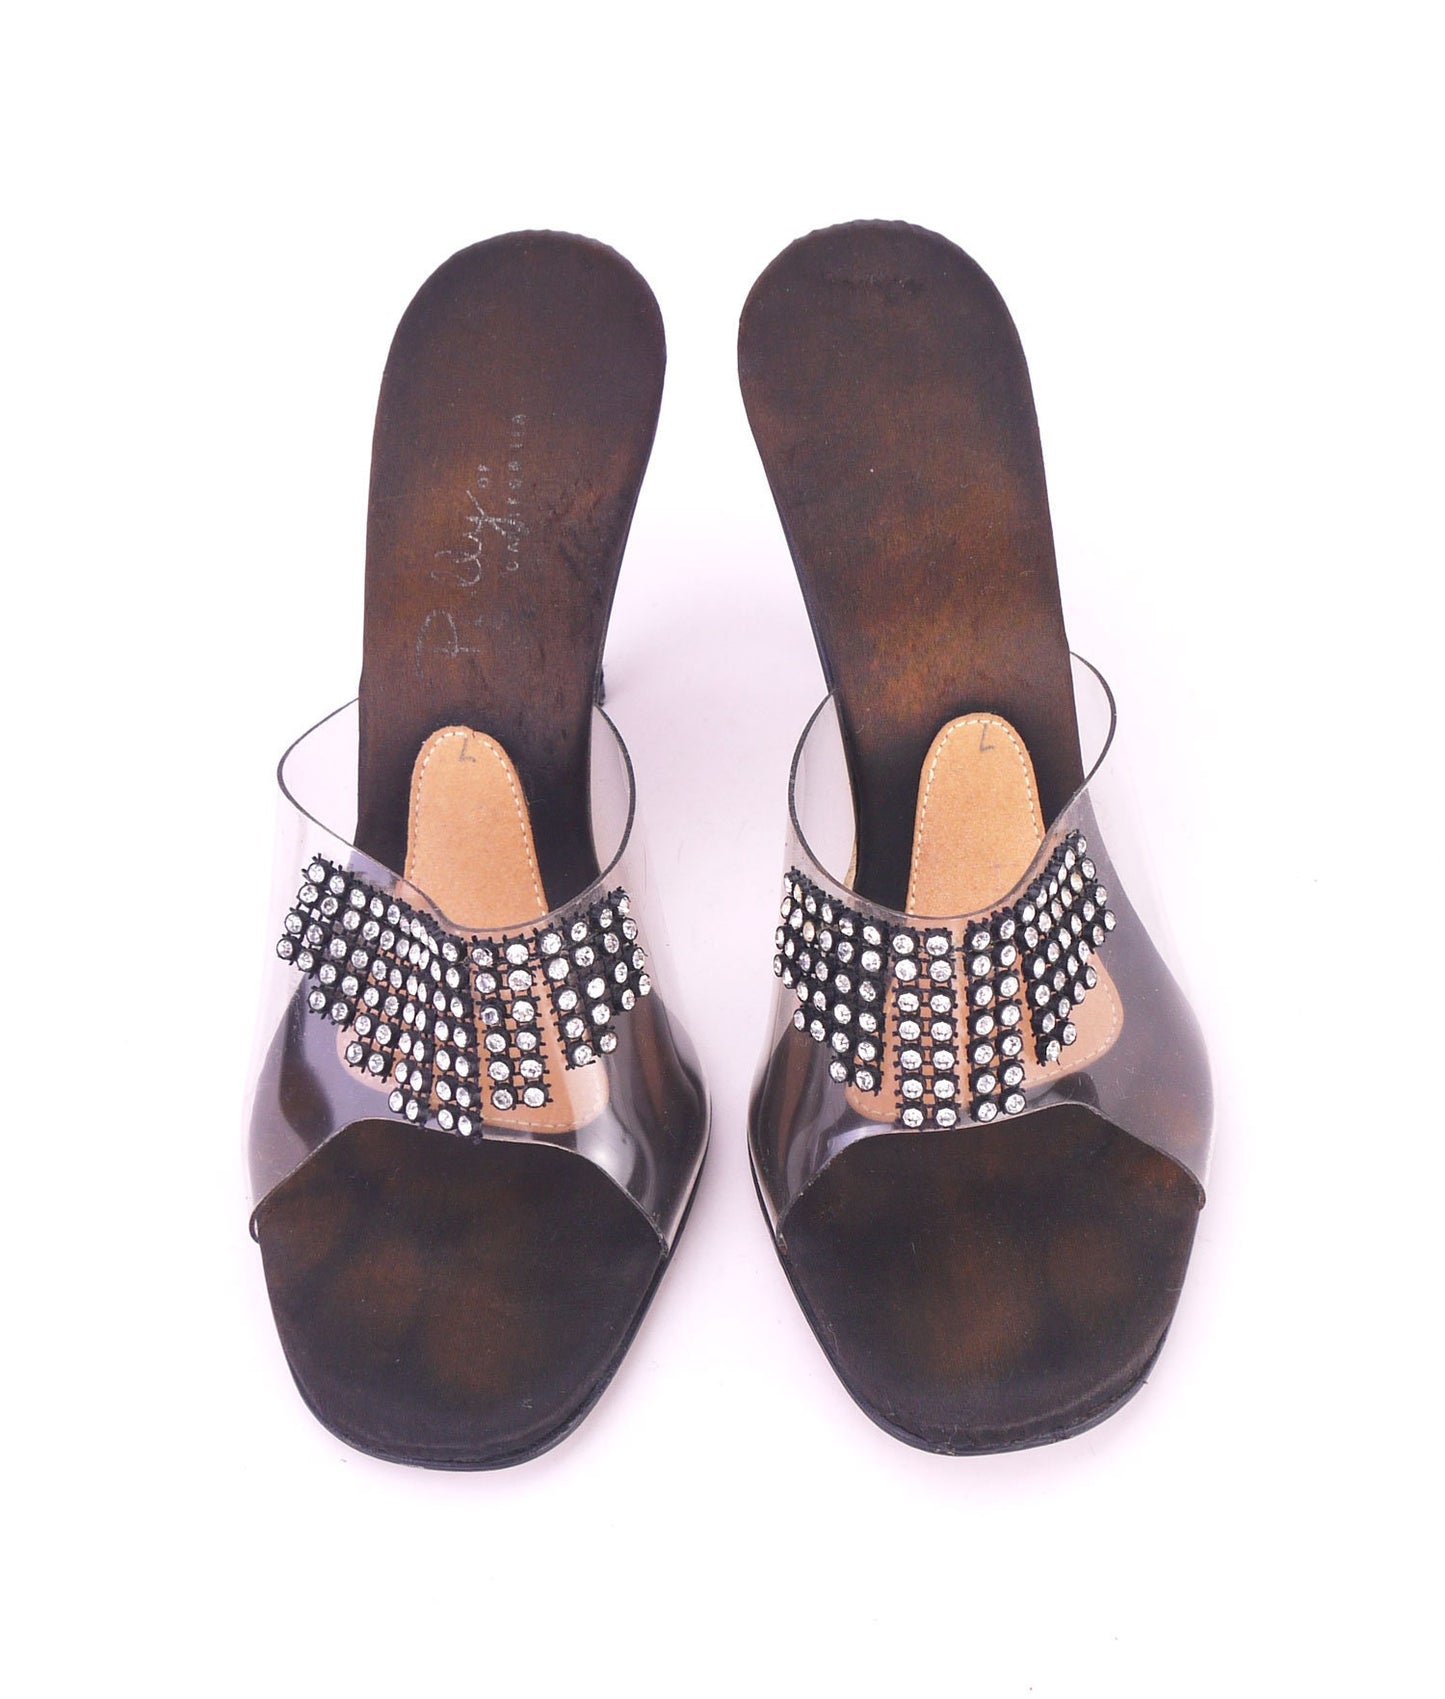 1960s Black Satin & Clear Vinyl Mules by Polly UK 4.5